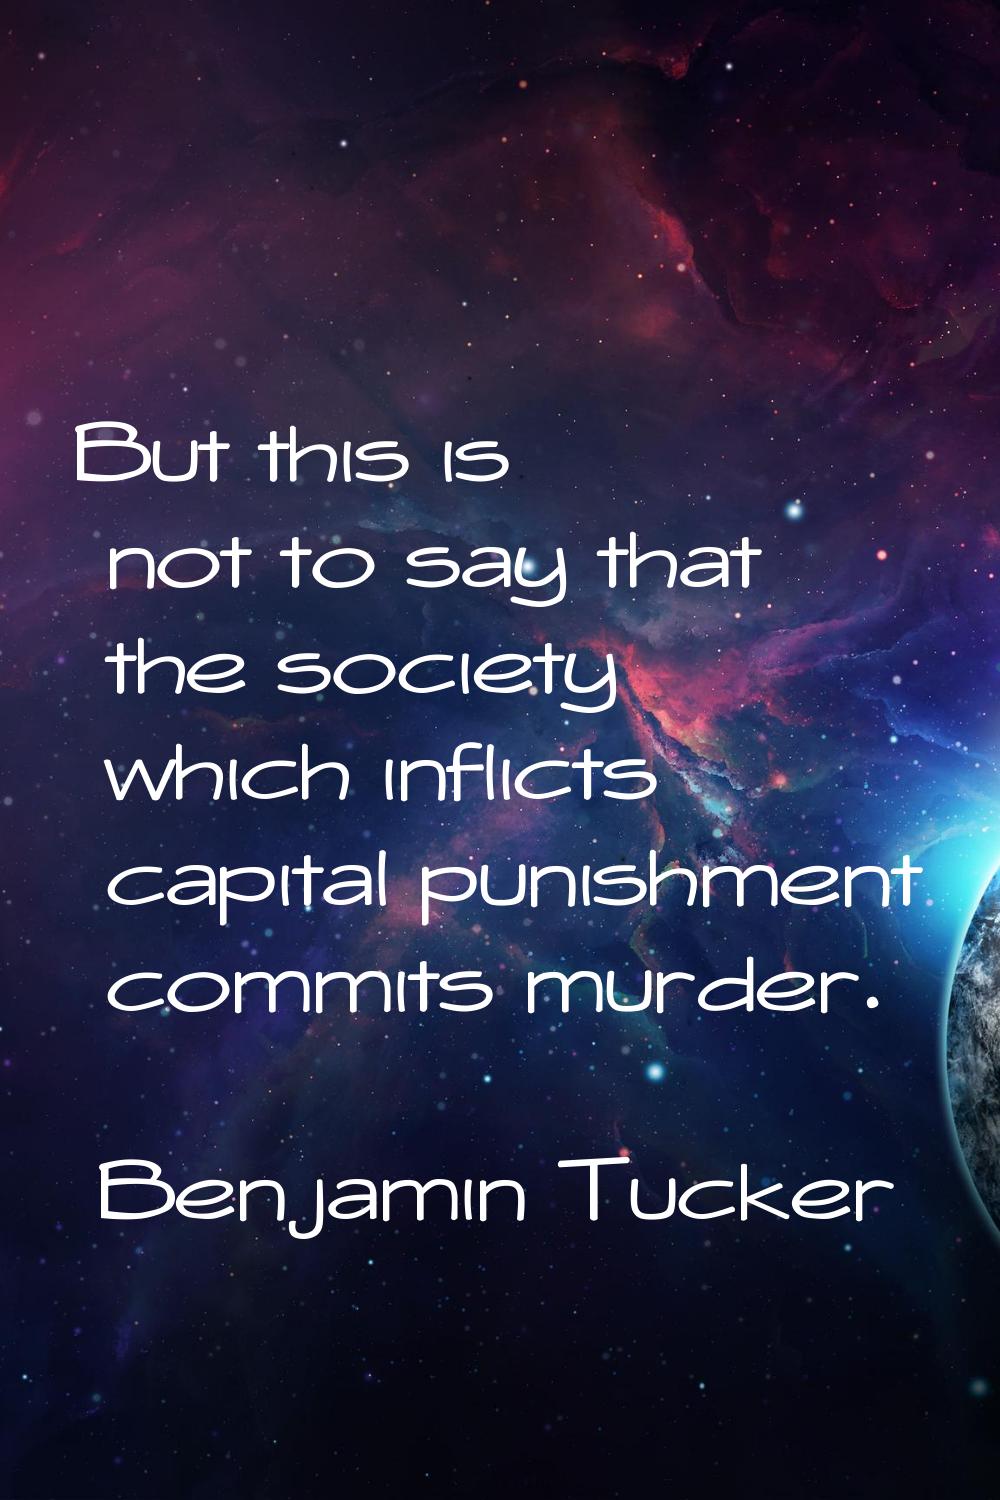 But this is not to say that the society which inflicts capital punishment commits murder.